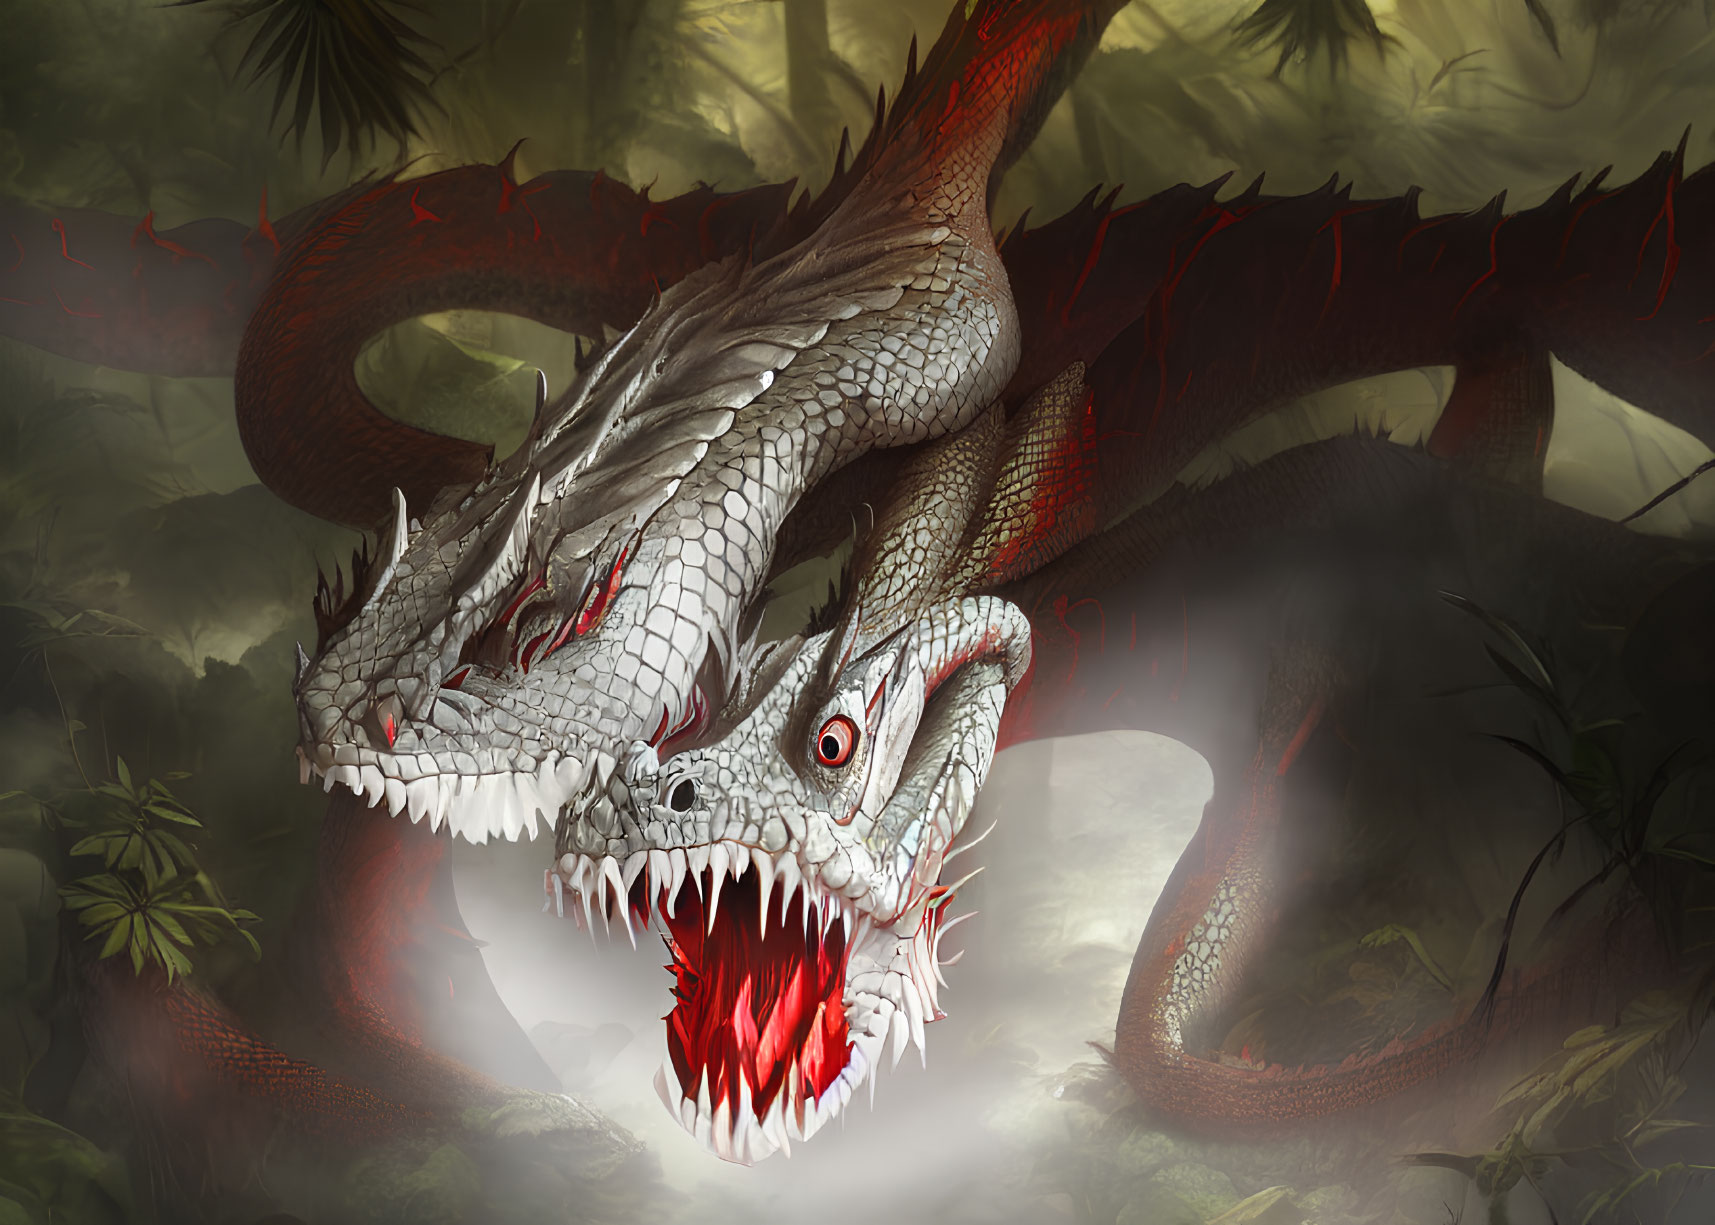 Two-Headed Dragon with Red Eyes and Spiny Frills in Misty Jungle